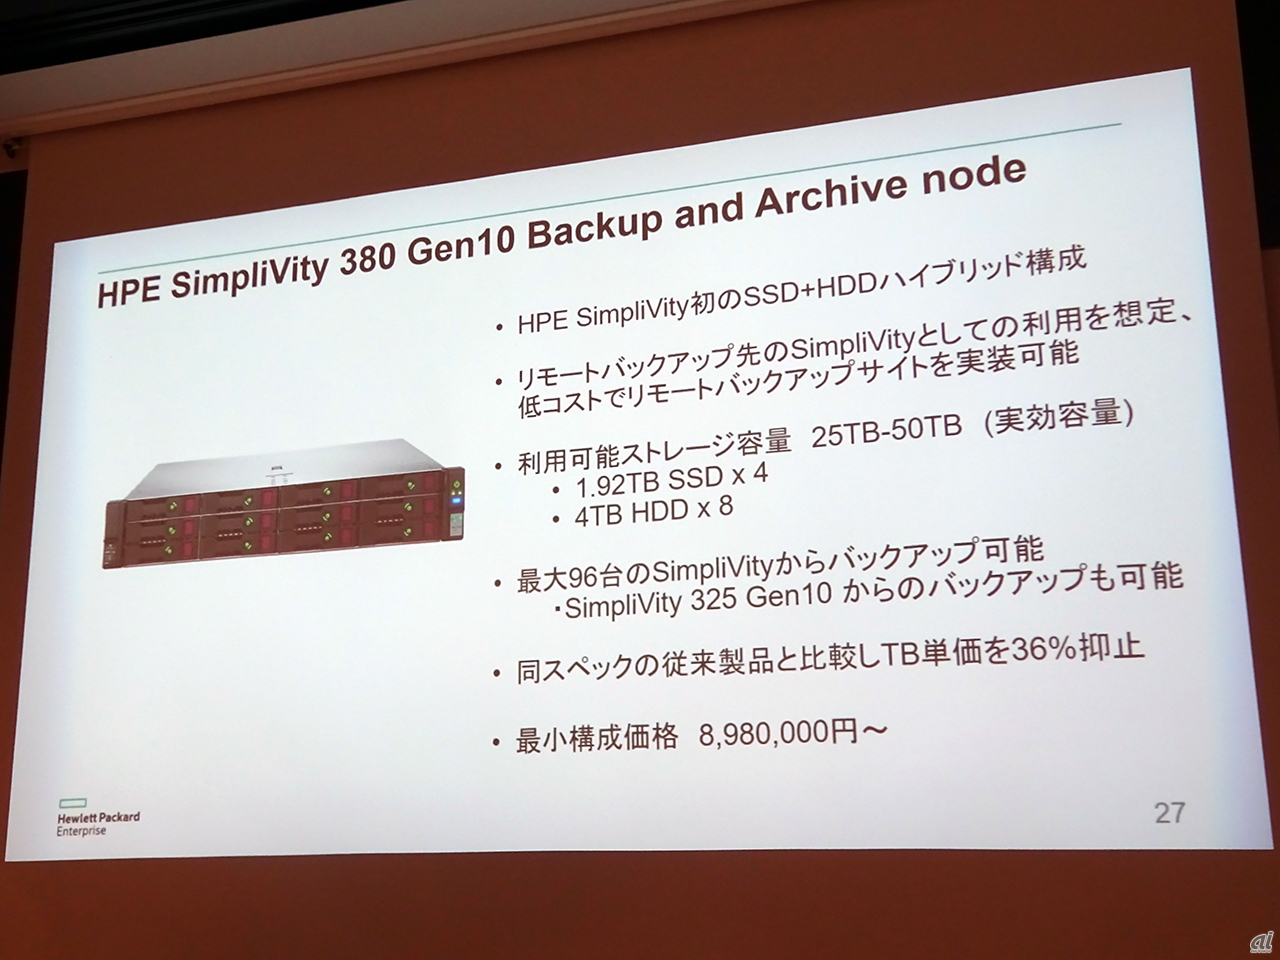 HPE SimpliVity 380 Backup and Archive node